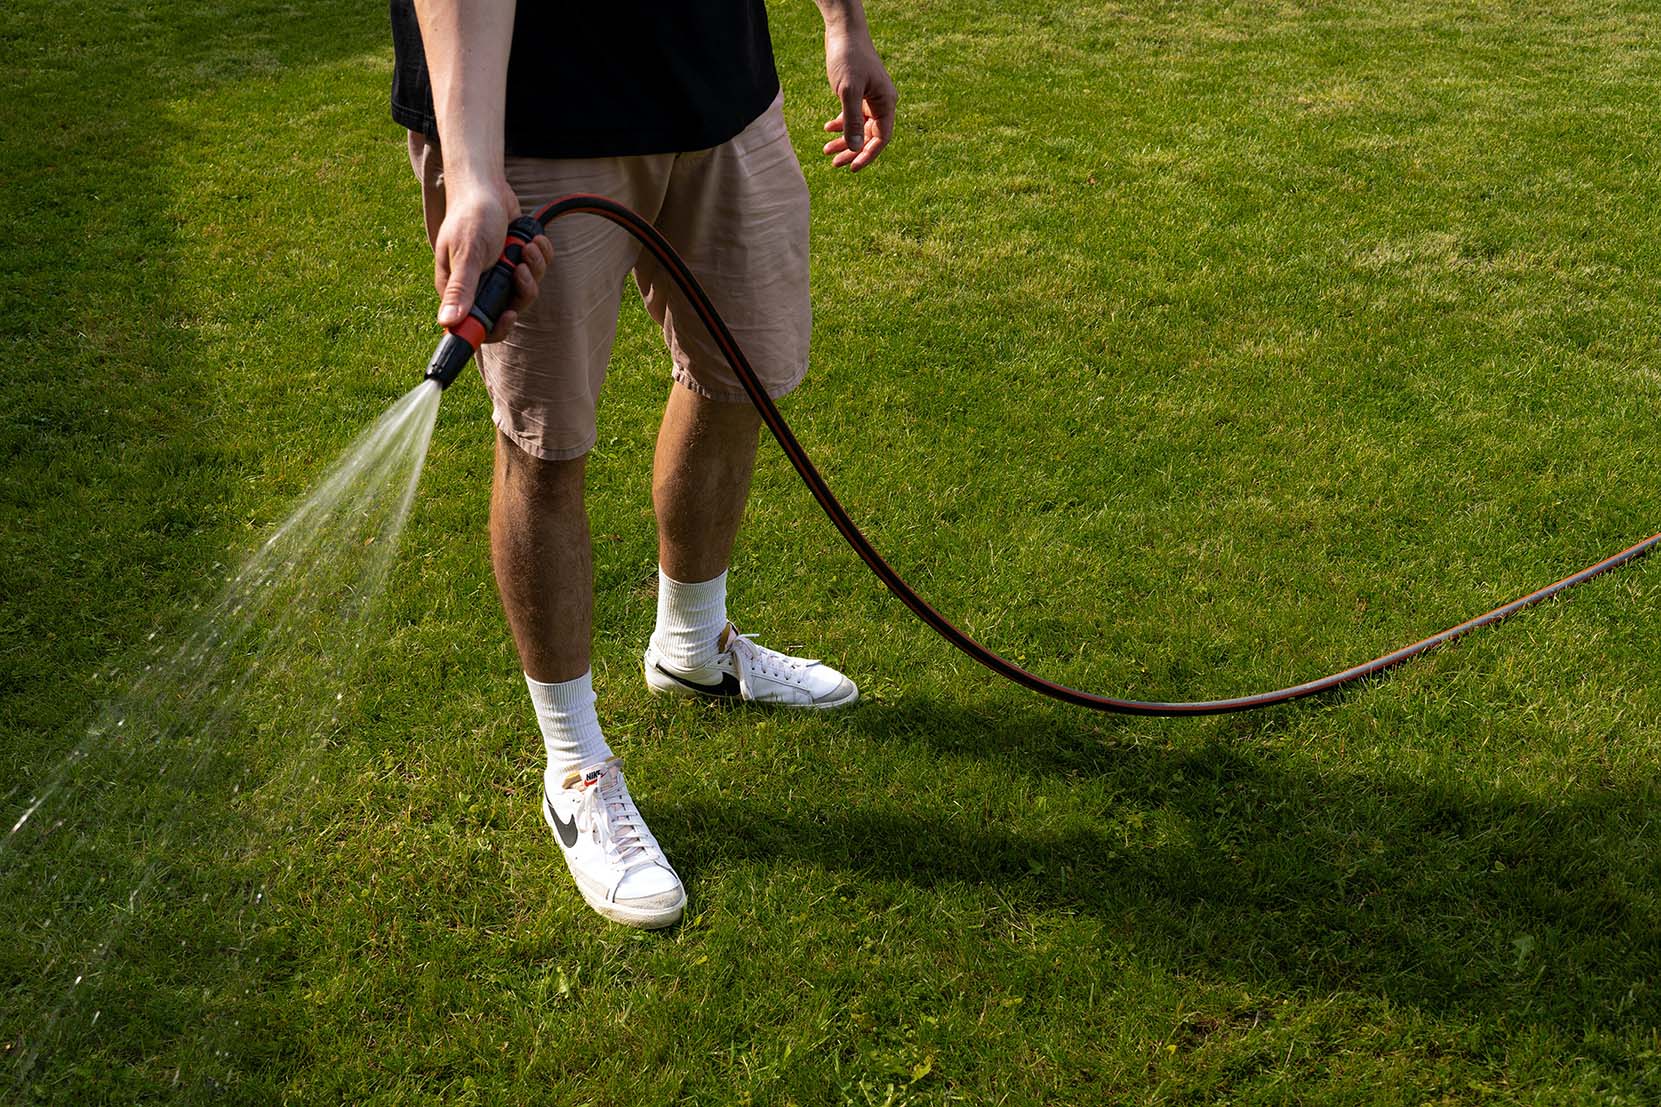 Best time to water grass in hot weather